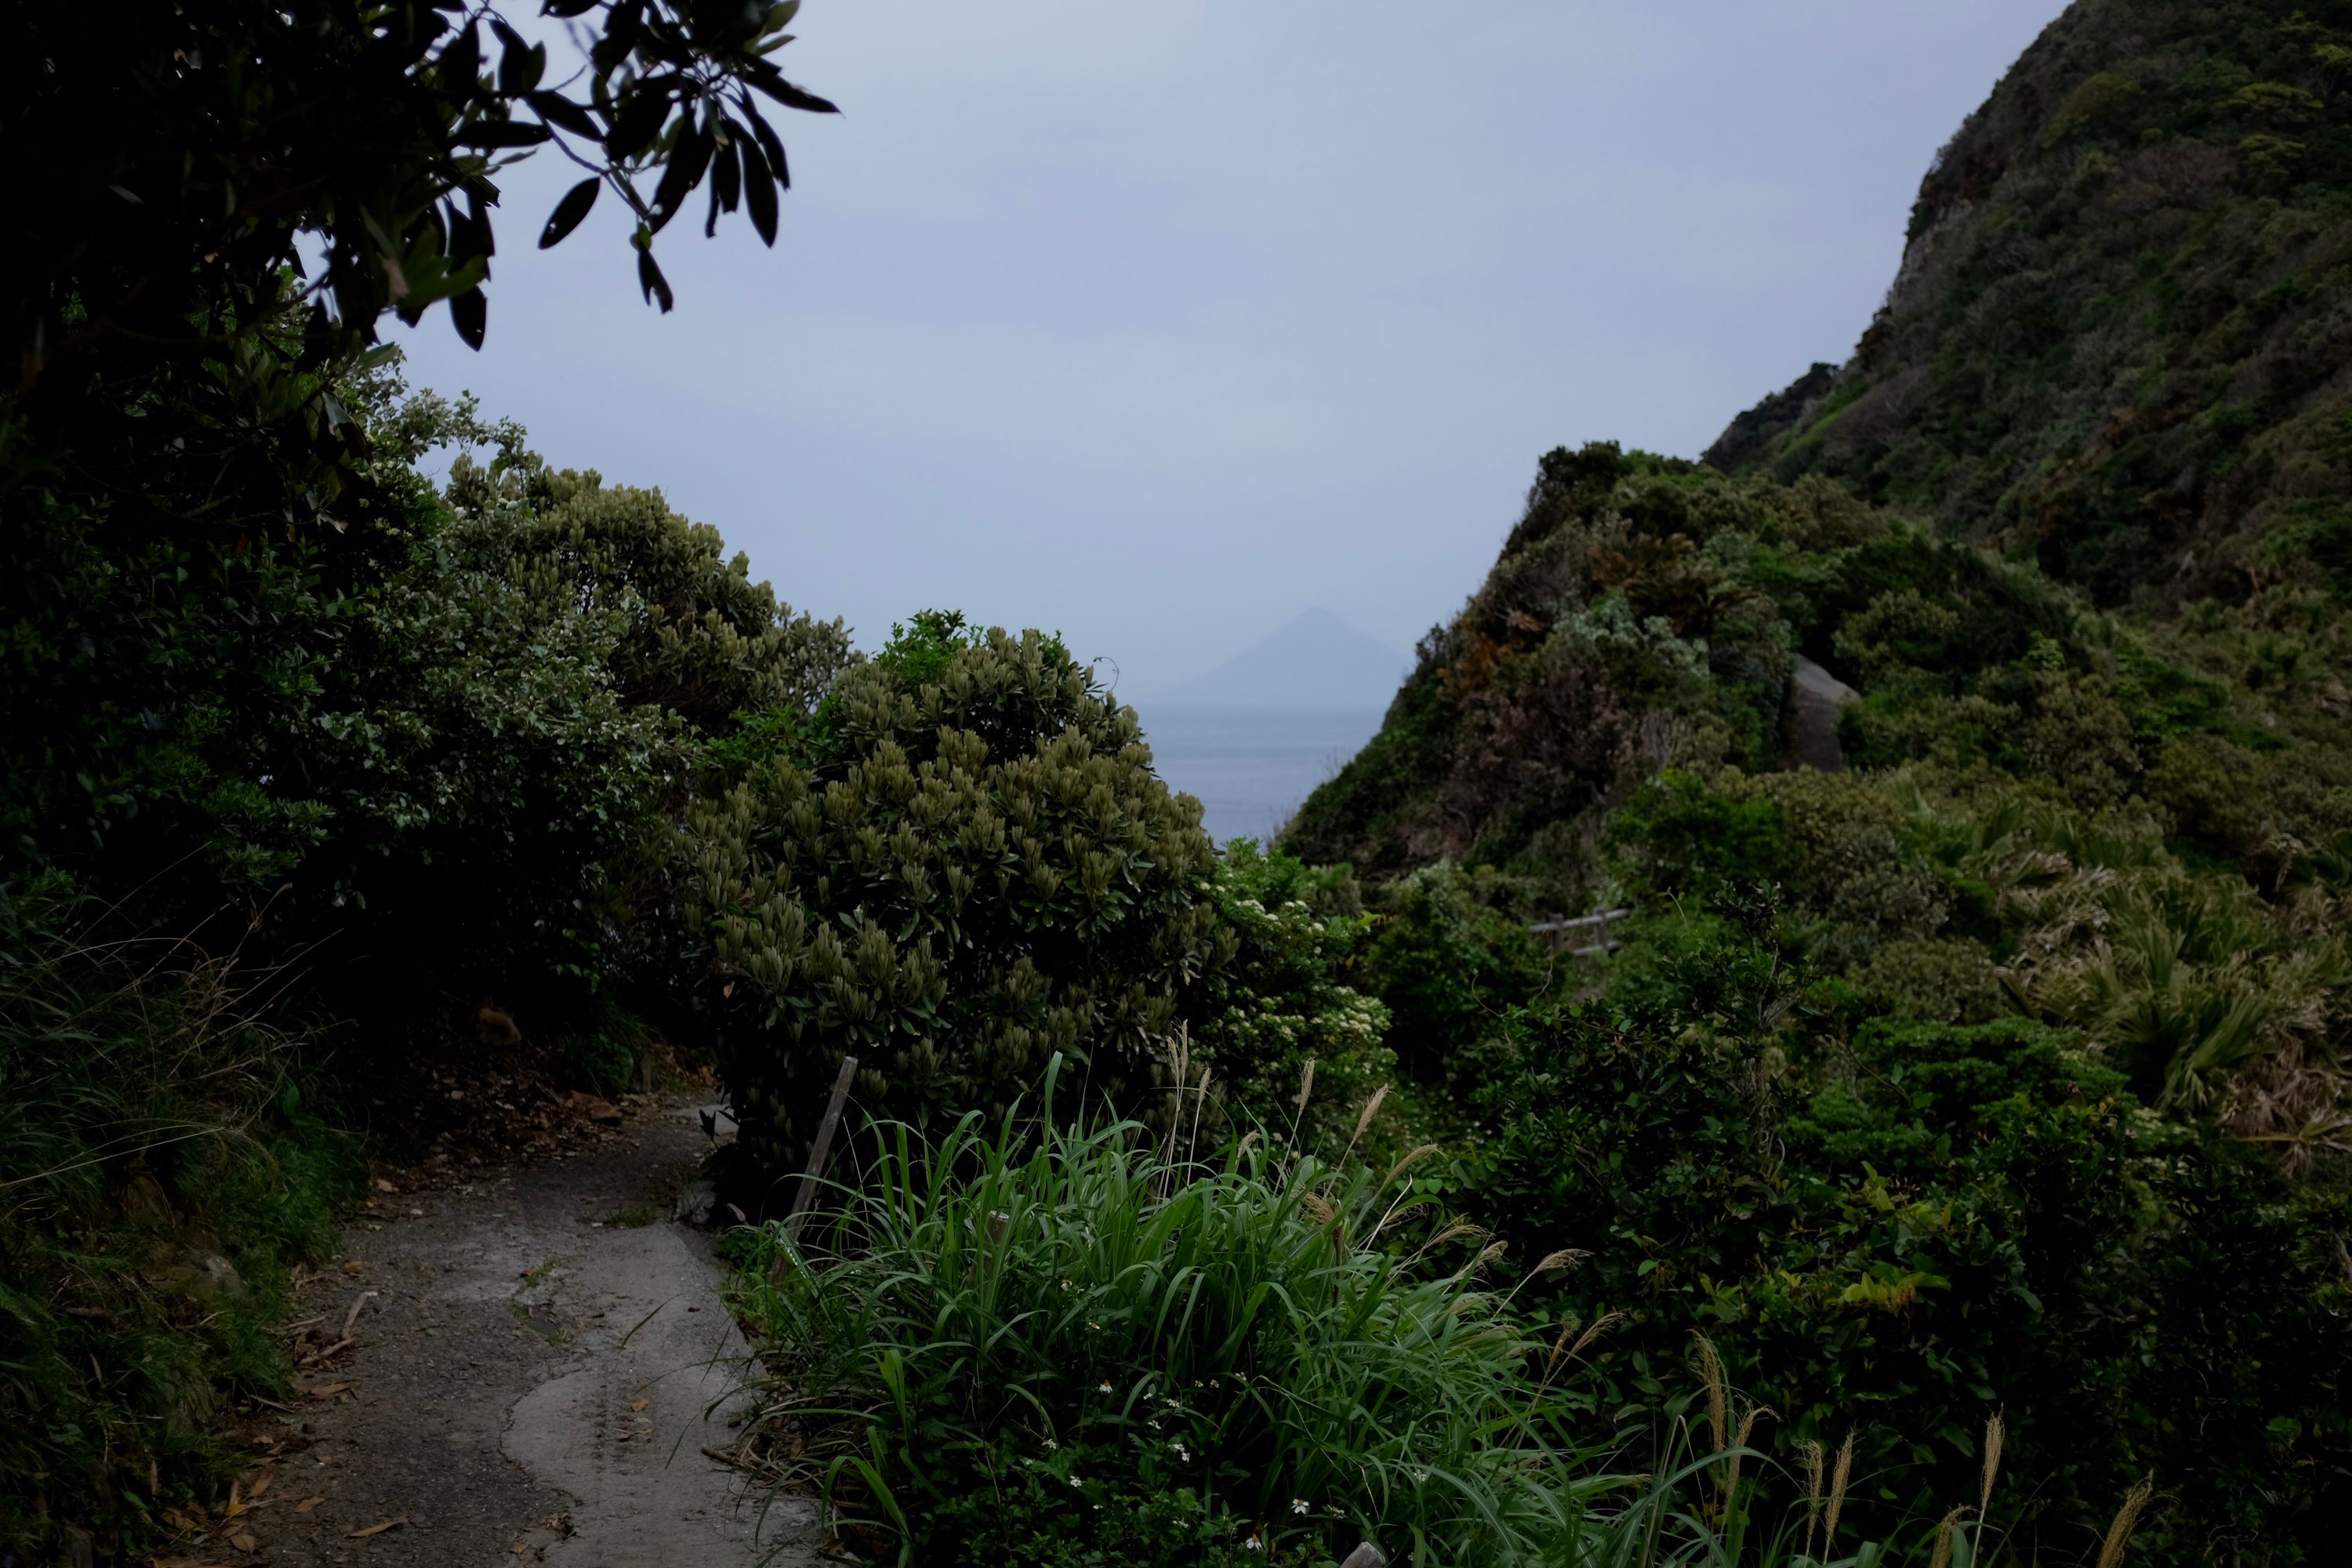 A very distant view of Cape Sata from a path in the jungle.